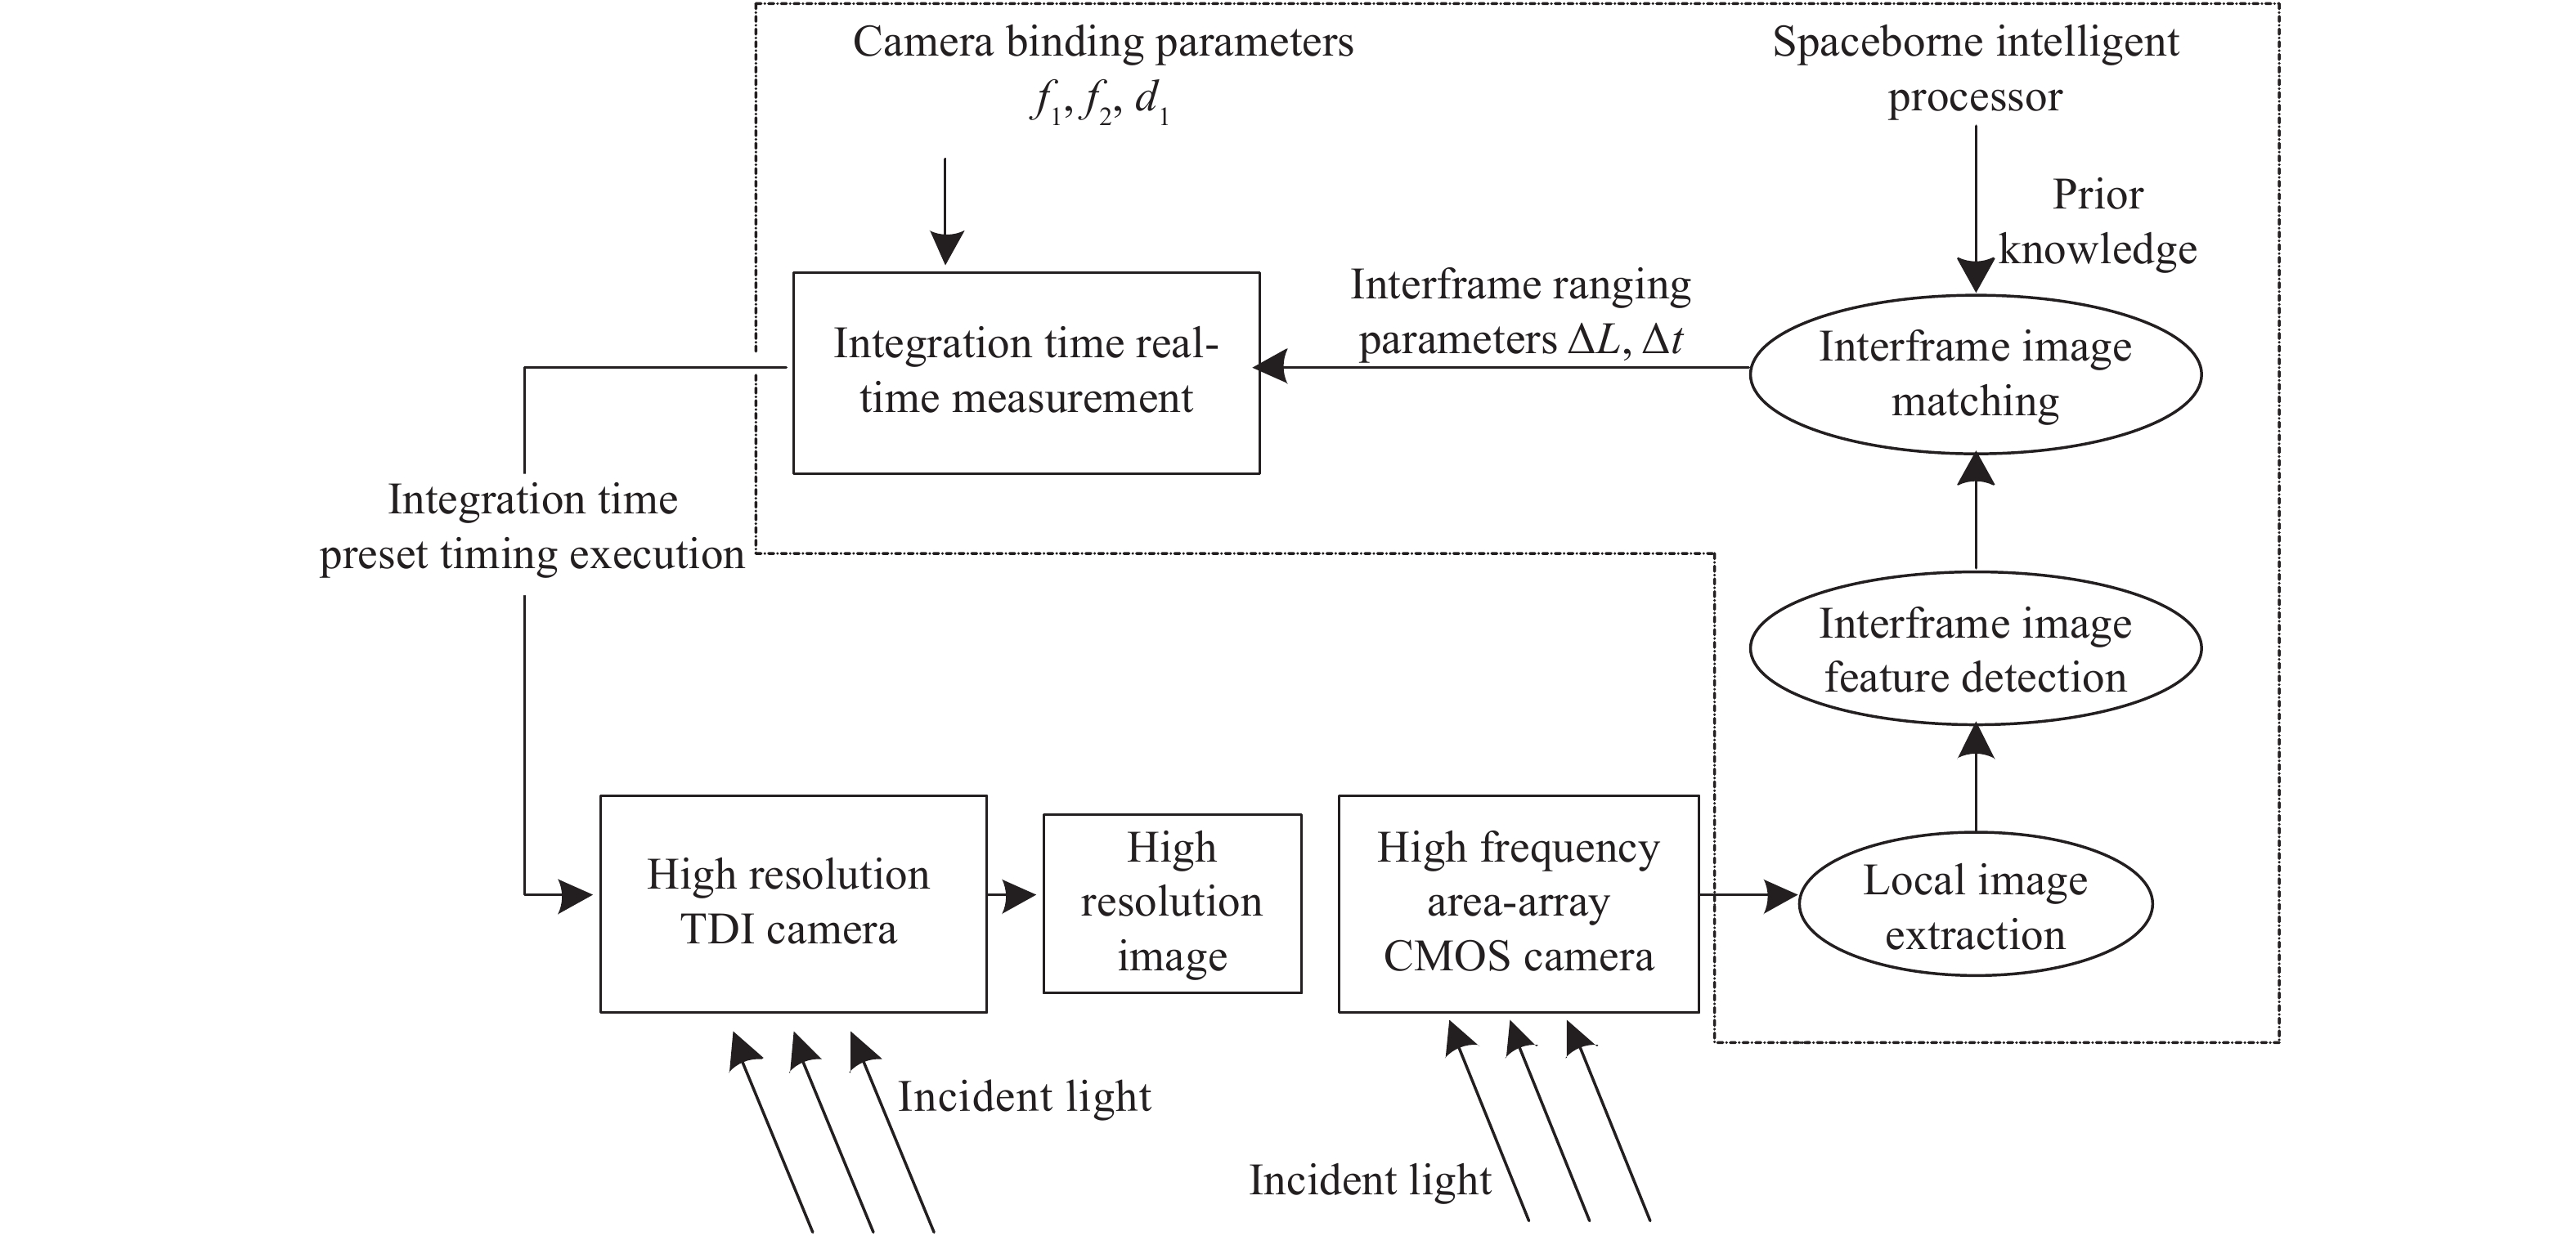 Integration time real-time measurement system based on interframe angle matching distance measurement